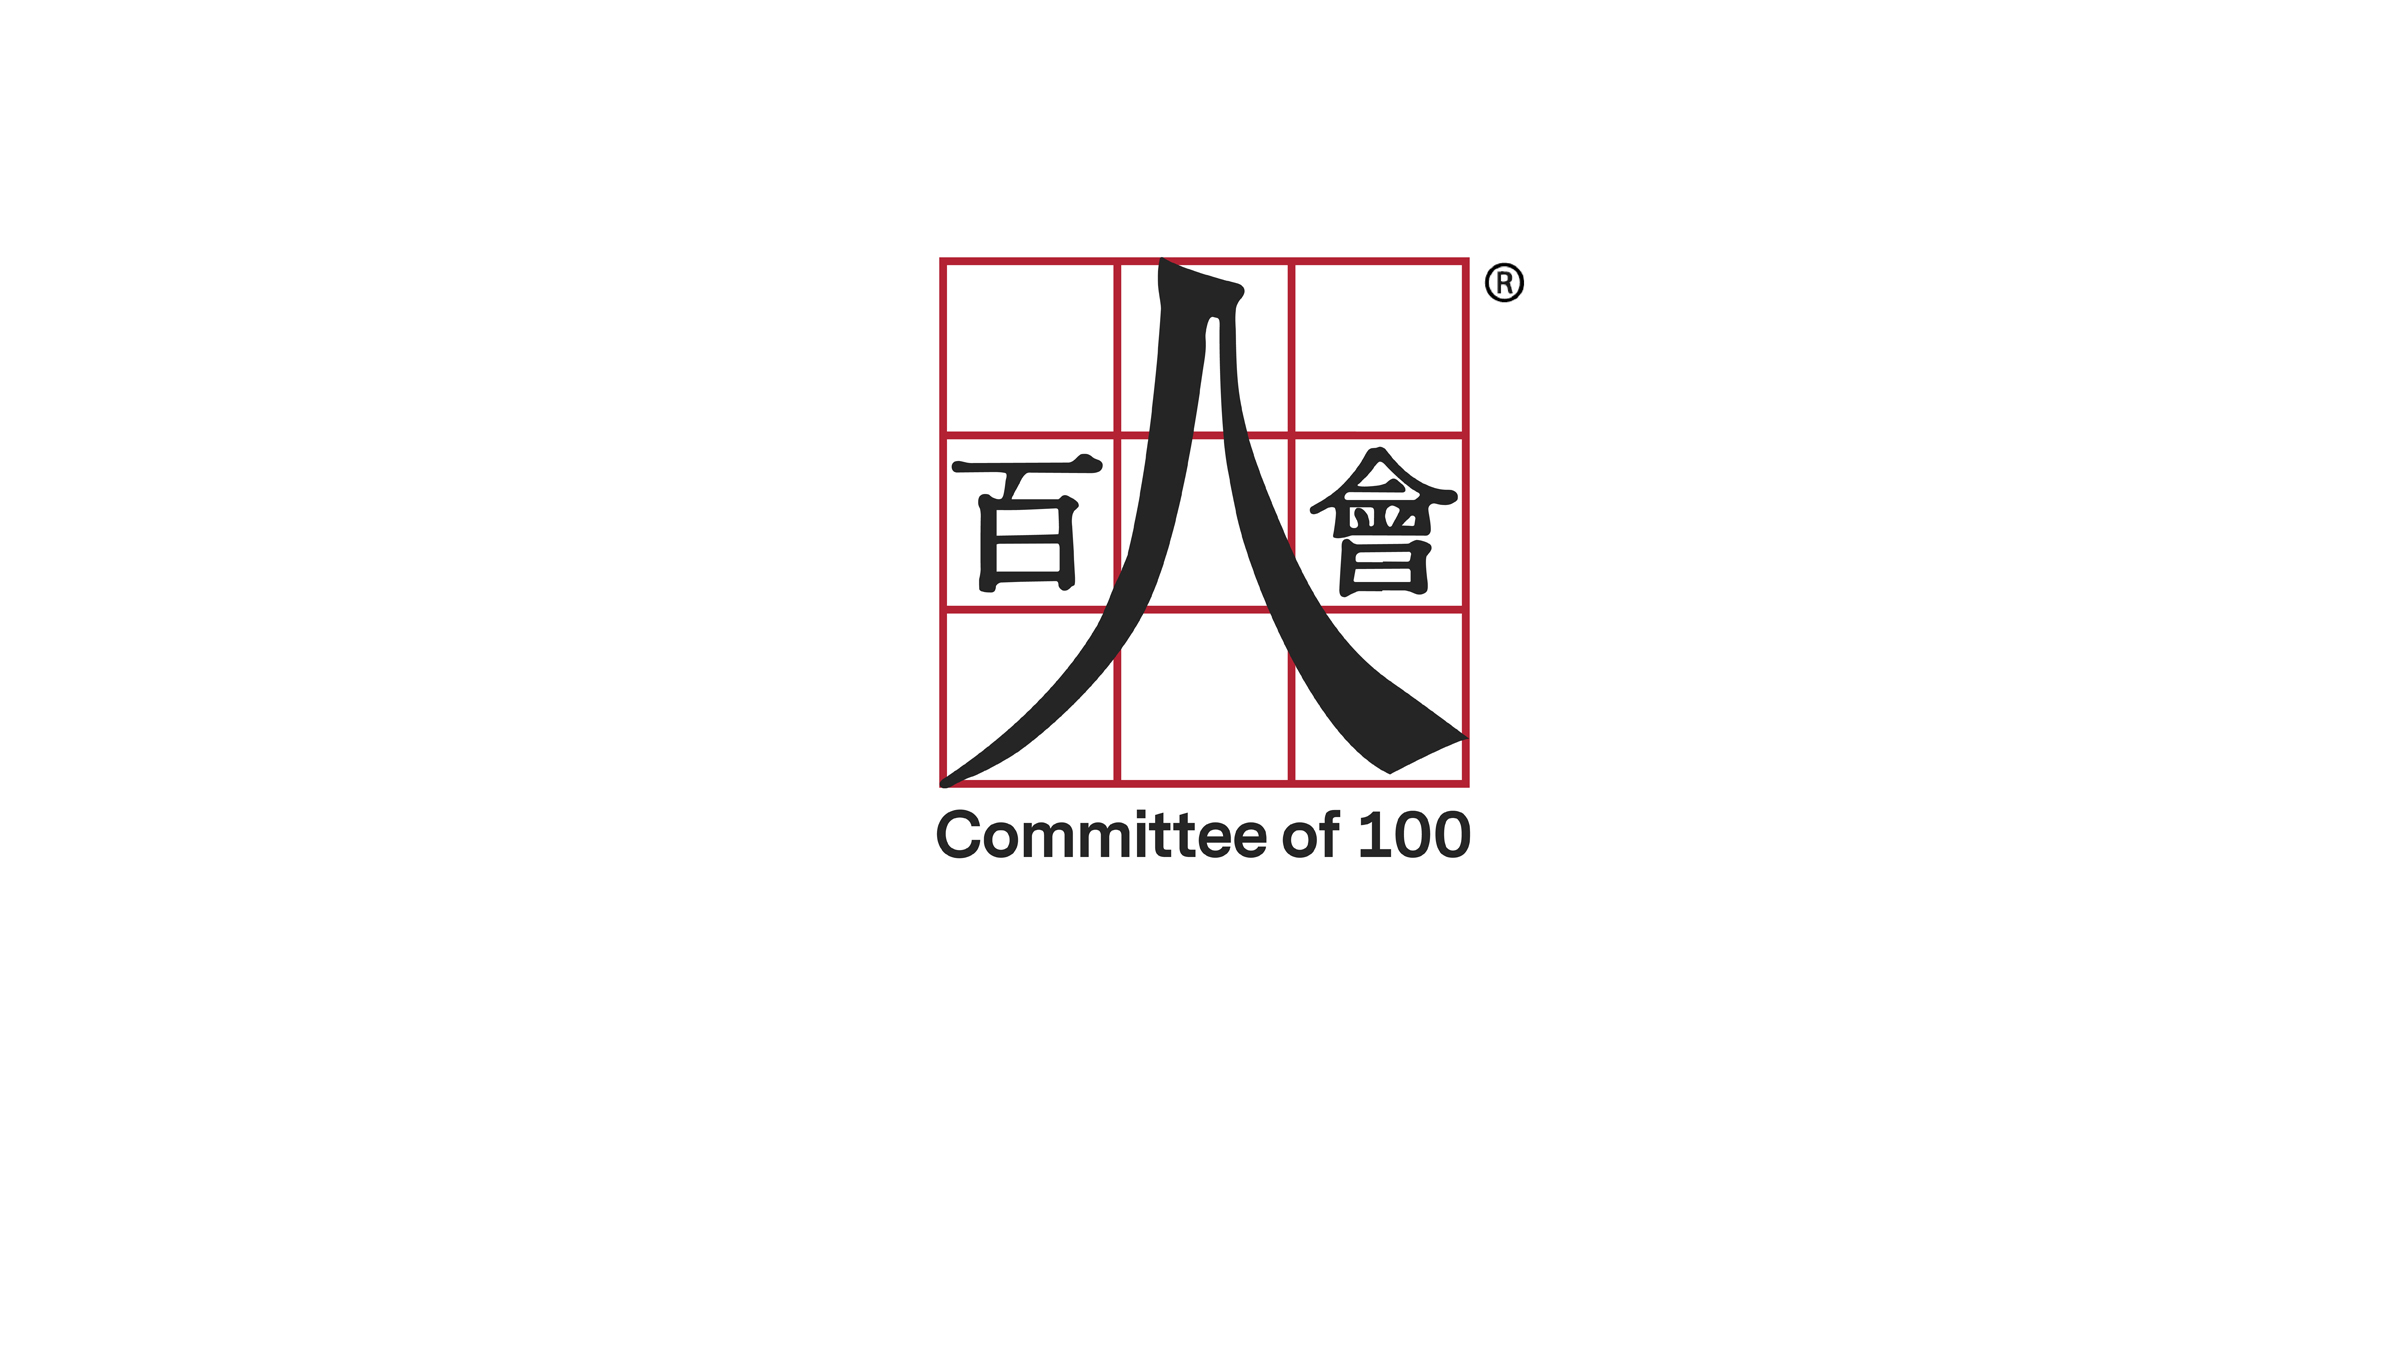 Committee of 100 Statement on Recent Misleading Media Report